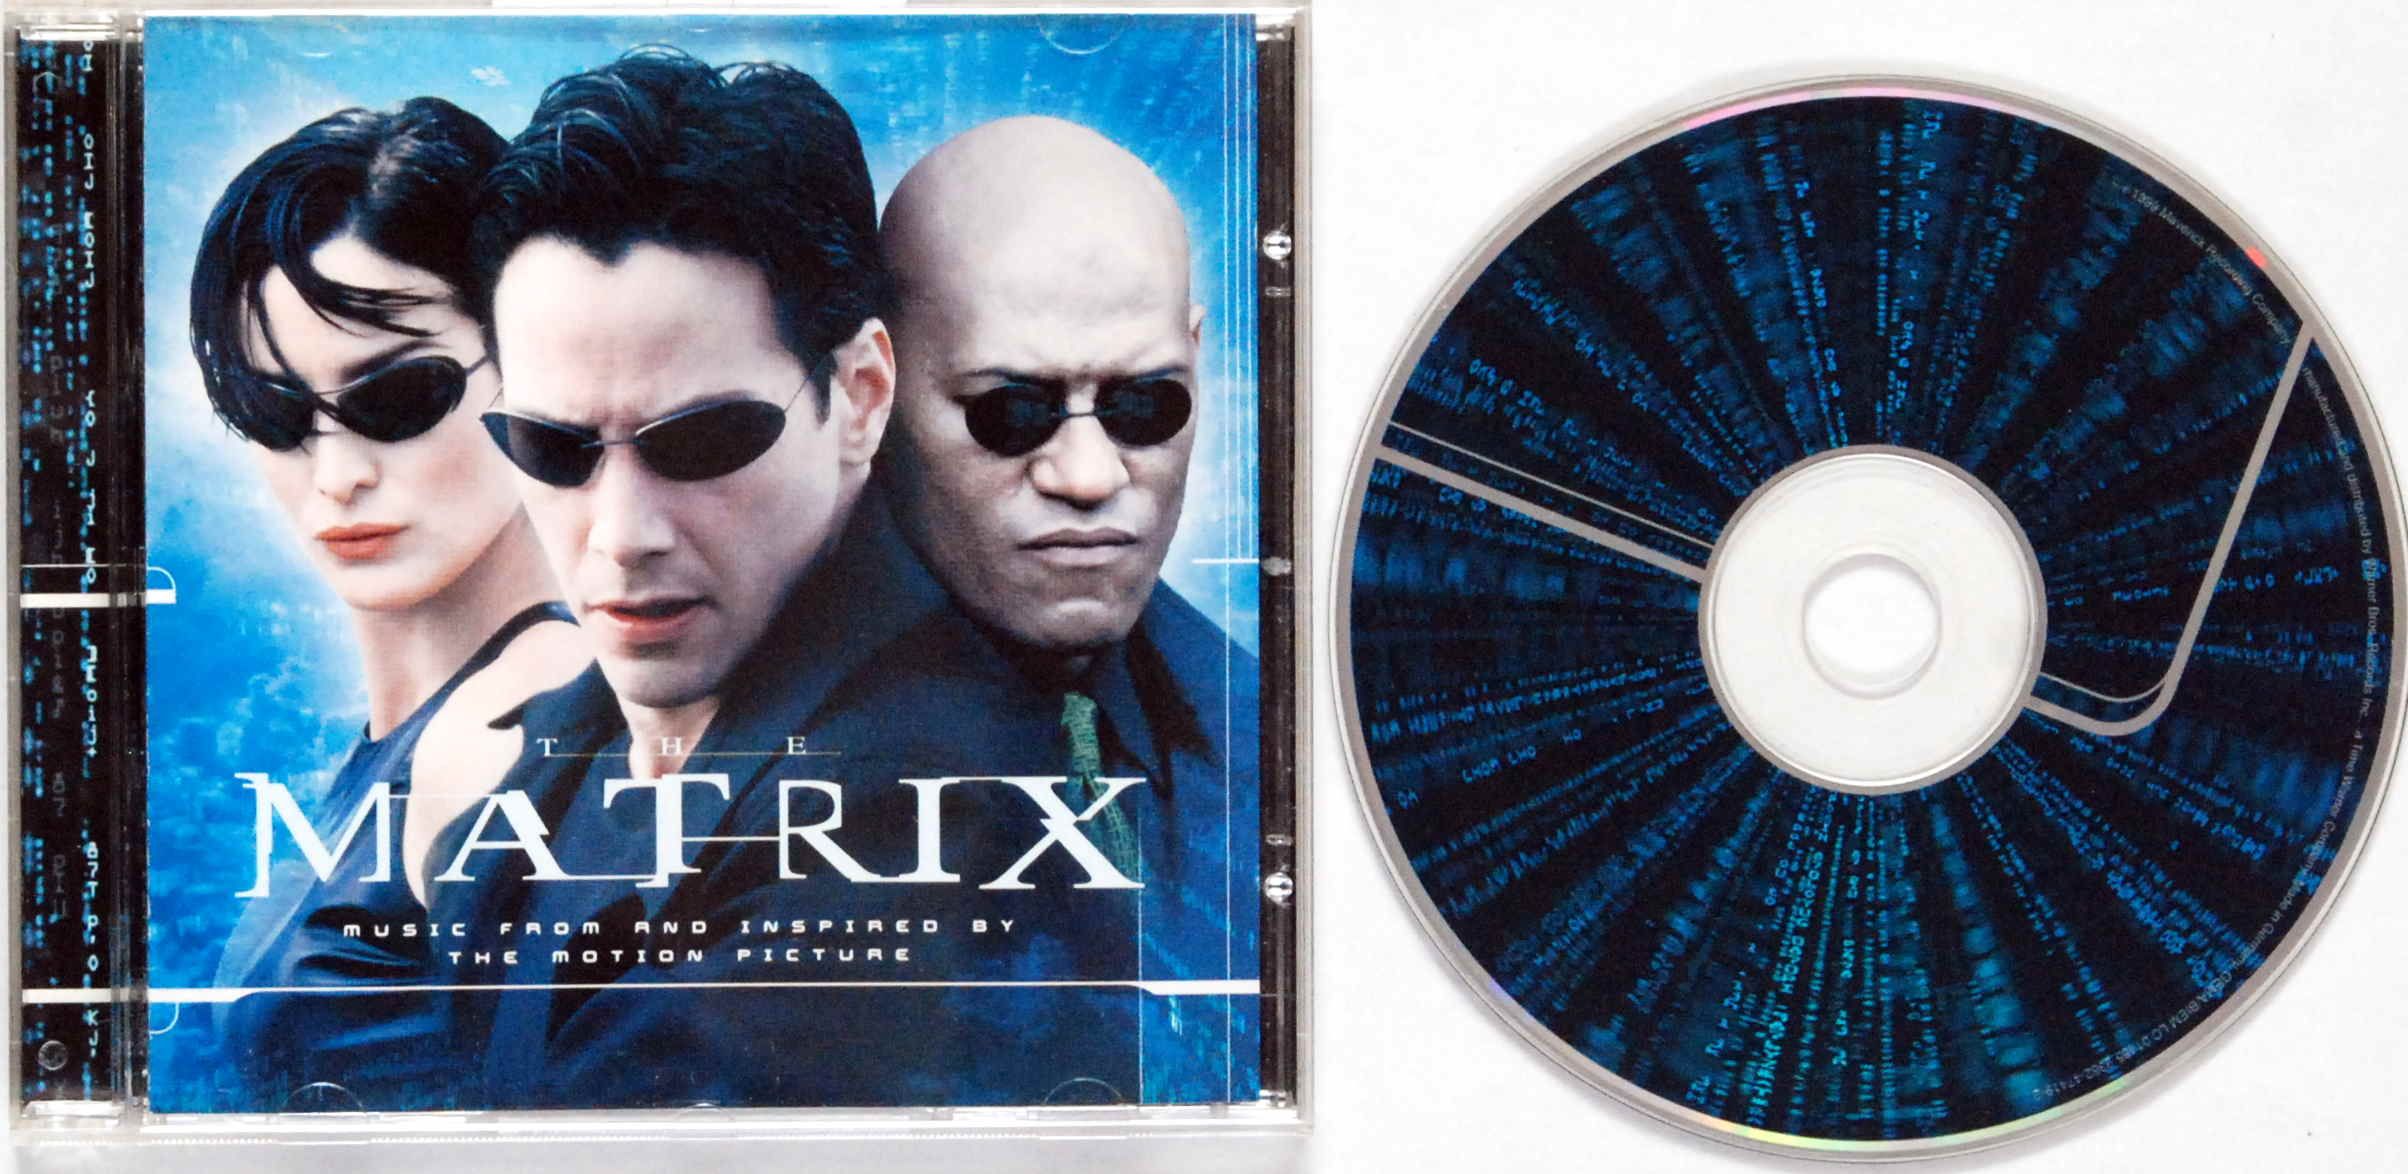 The Matrix - Music From And Inspired By The Motion Picture BDB